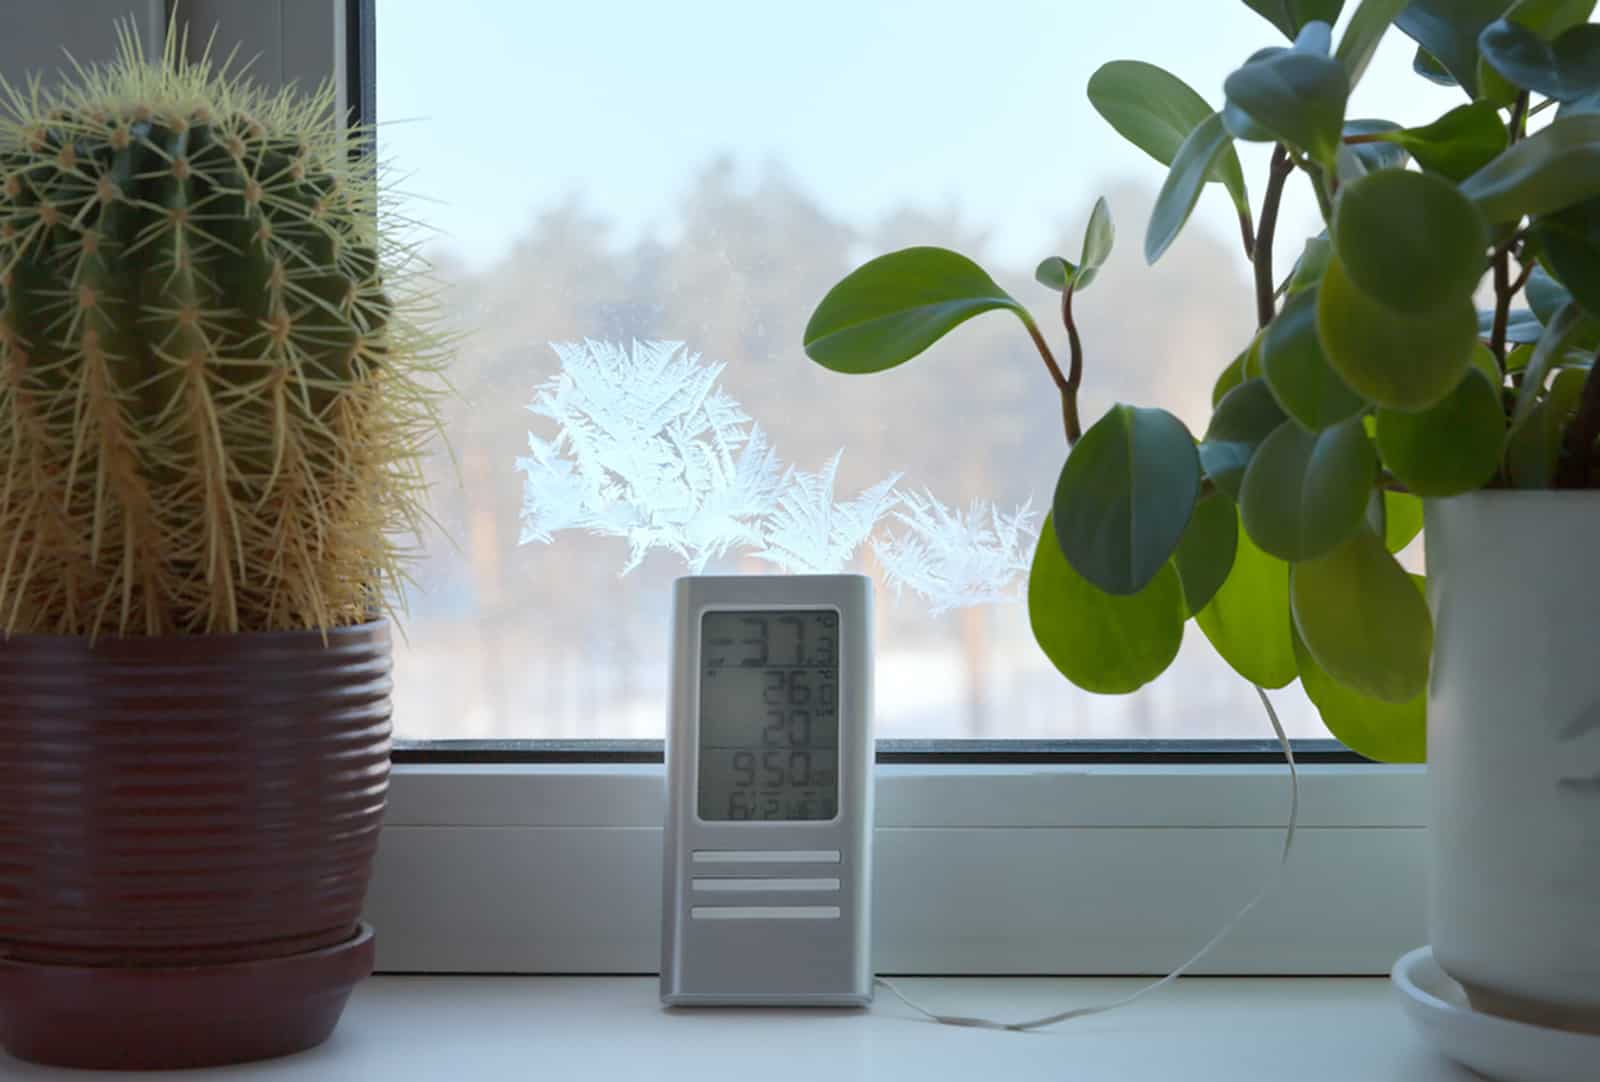 Potted flowers on a plastic window sill beside thermometer